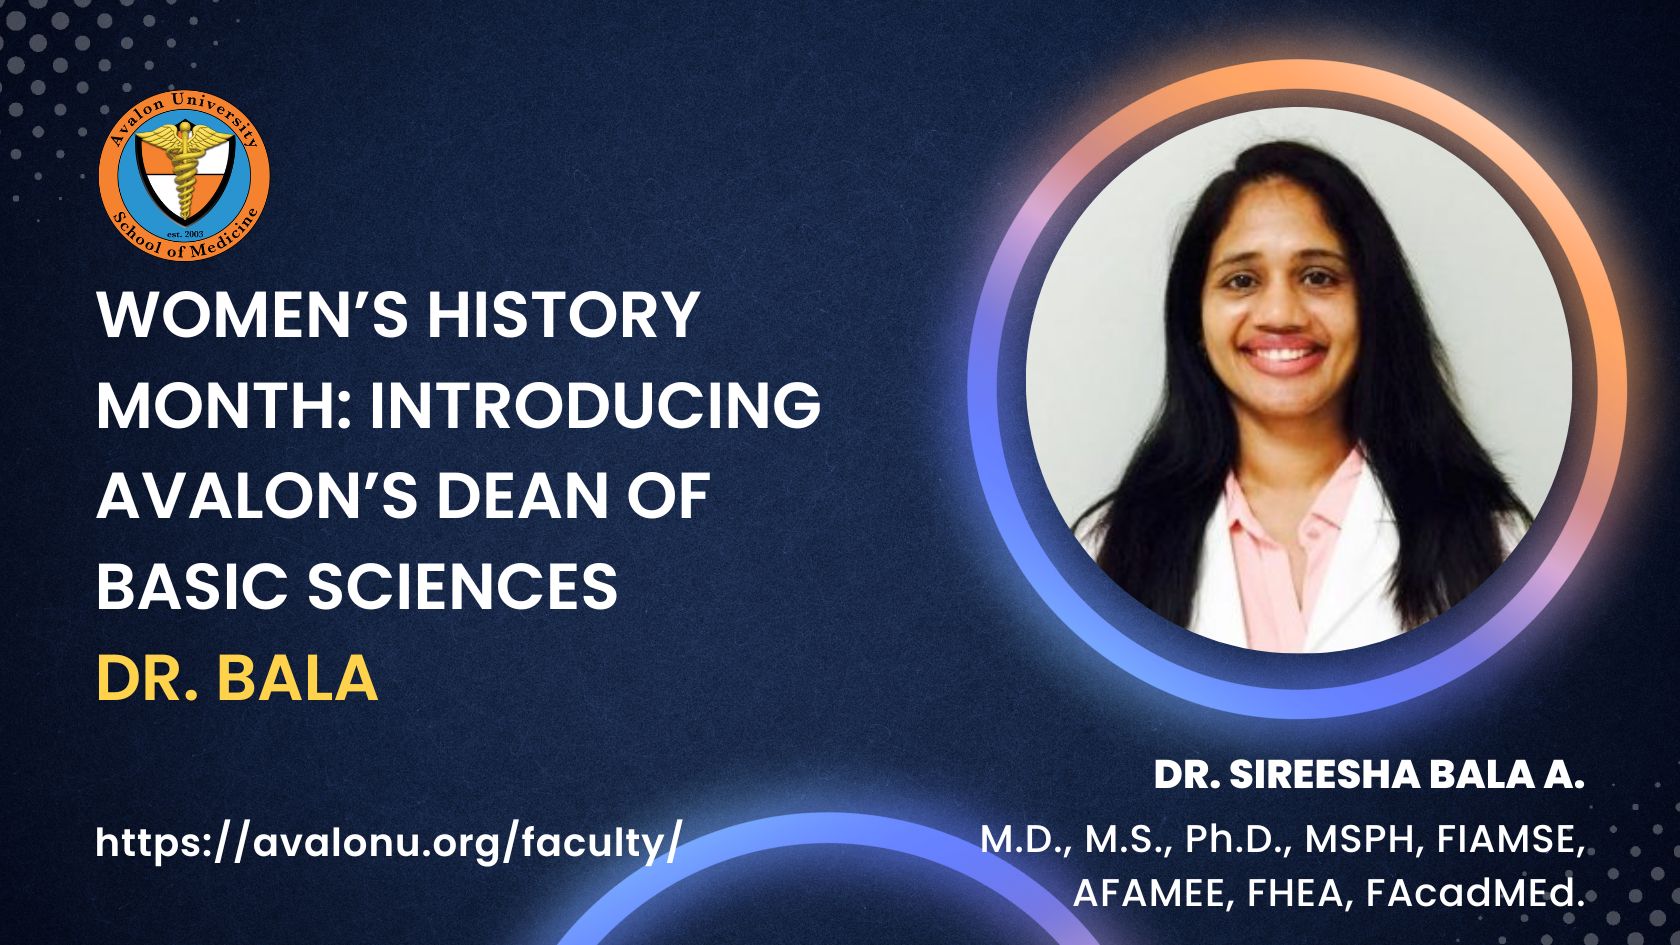 Women’s History Month Introducing Dr. Bala